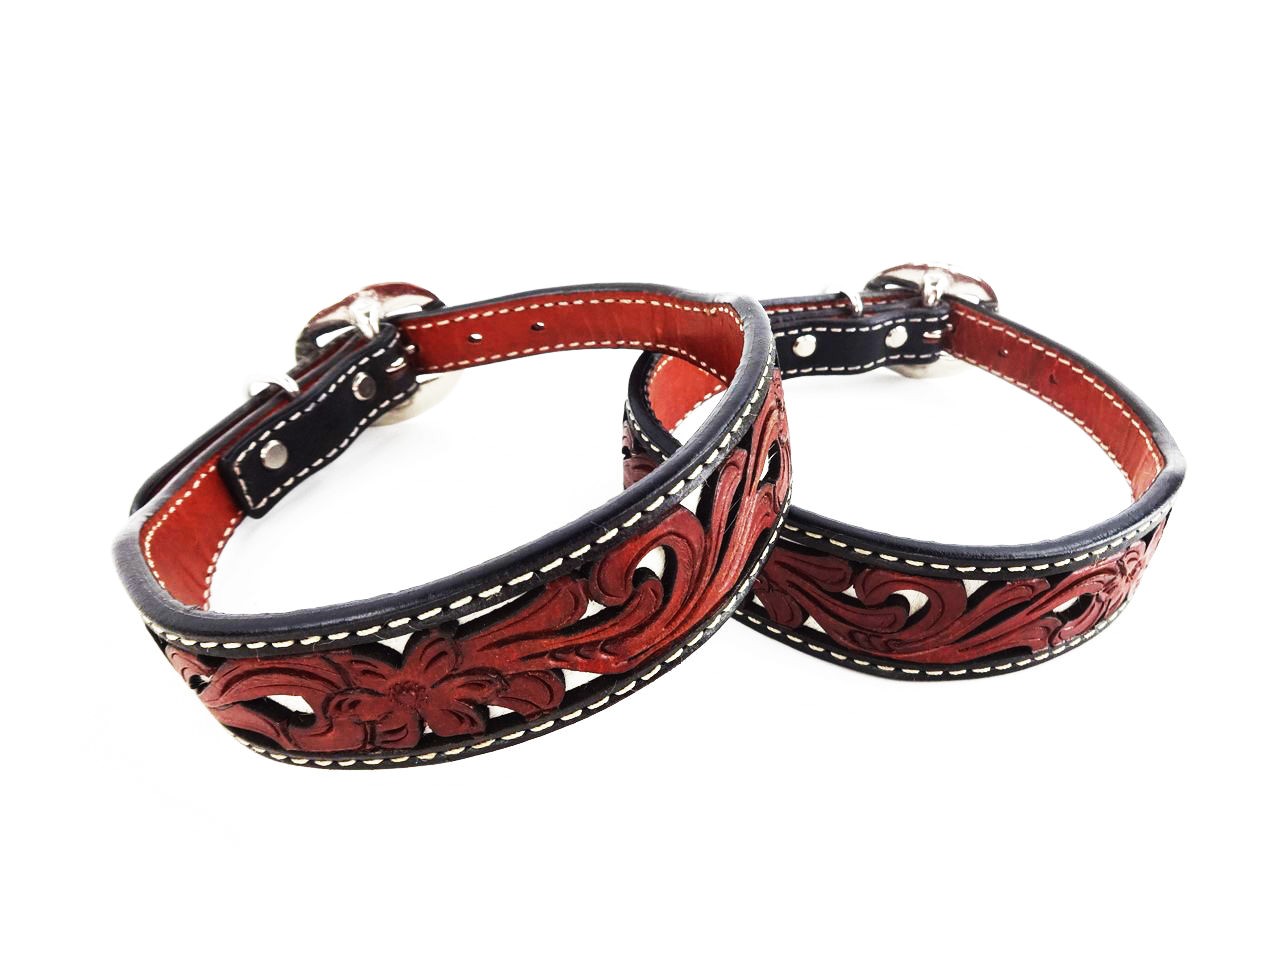 26 hair on filigree western style tooled leather k9 canine dog collar xl size 222528374277